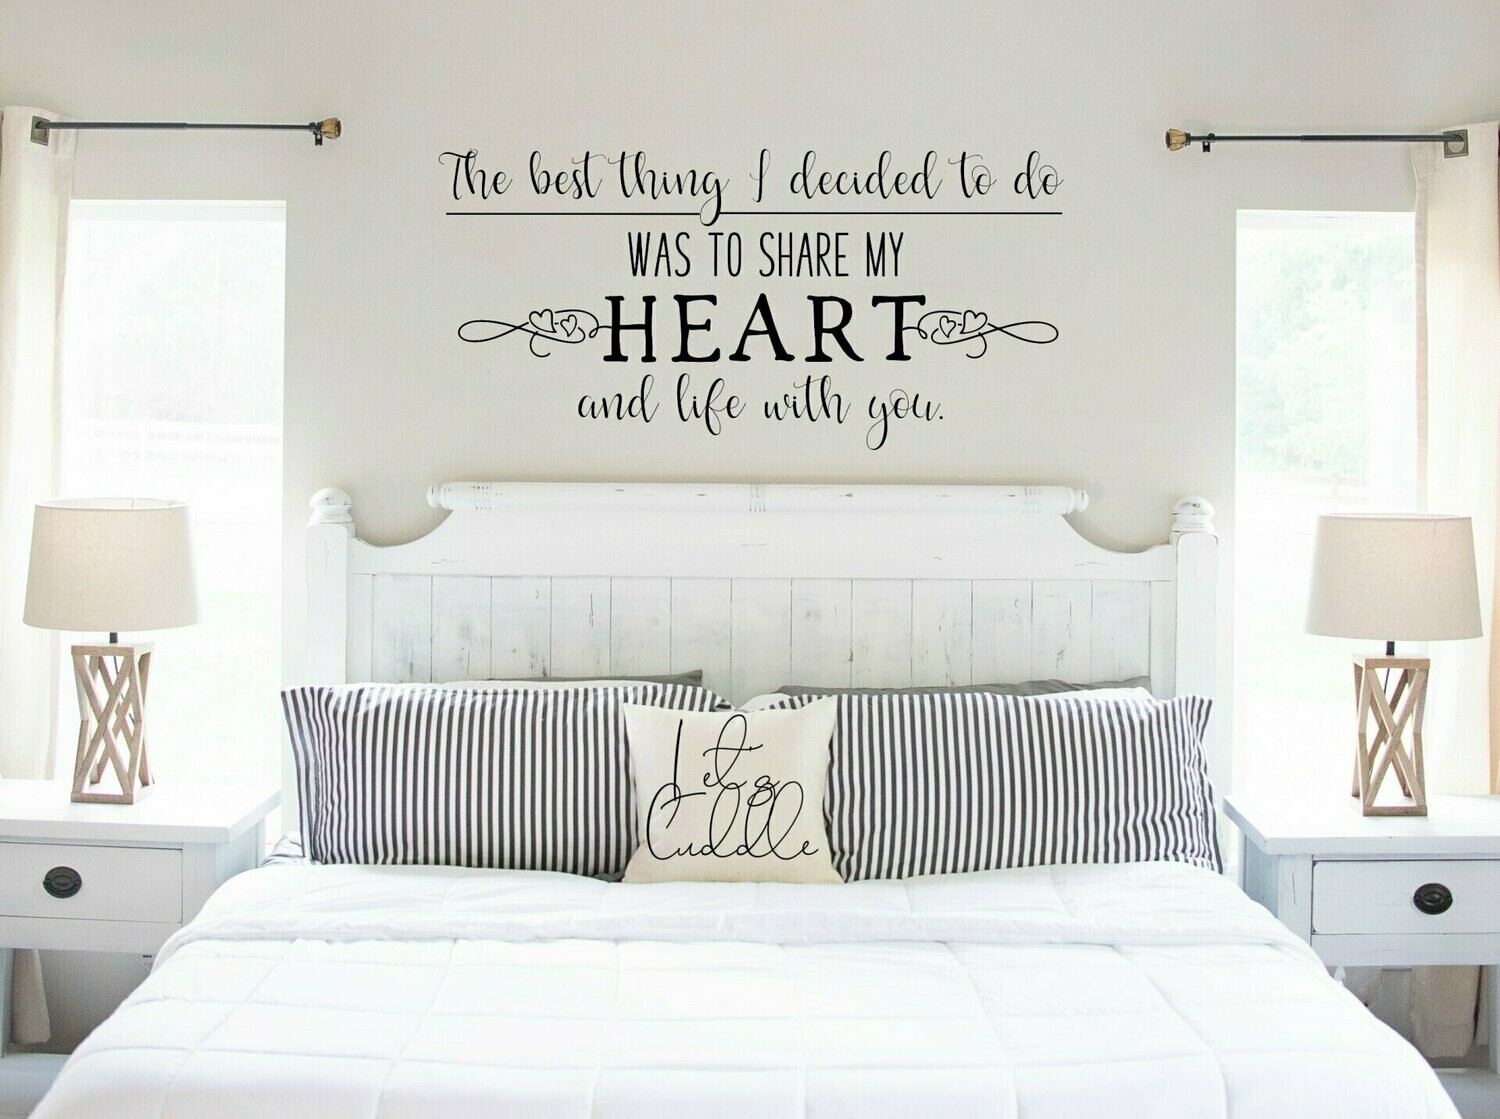 The Best Thing I Decided to Do Was to Share my Heart & Life with You Vinyl Wall Decal